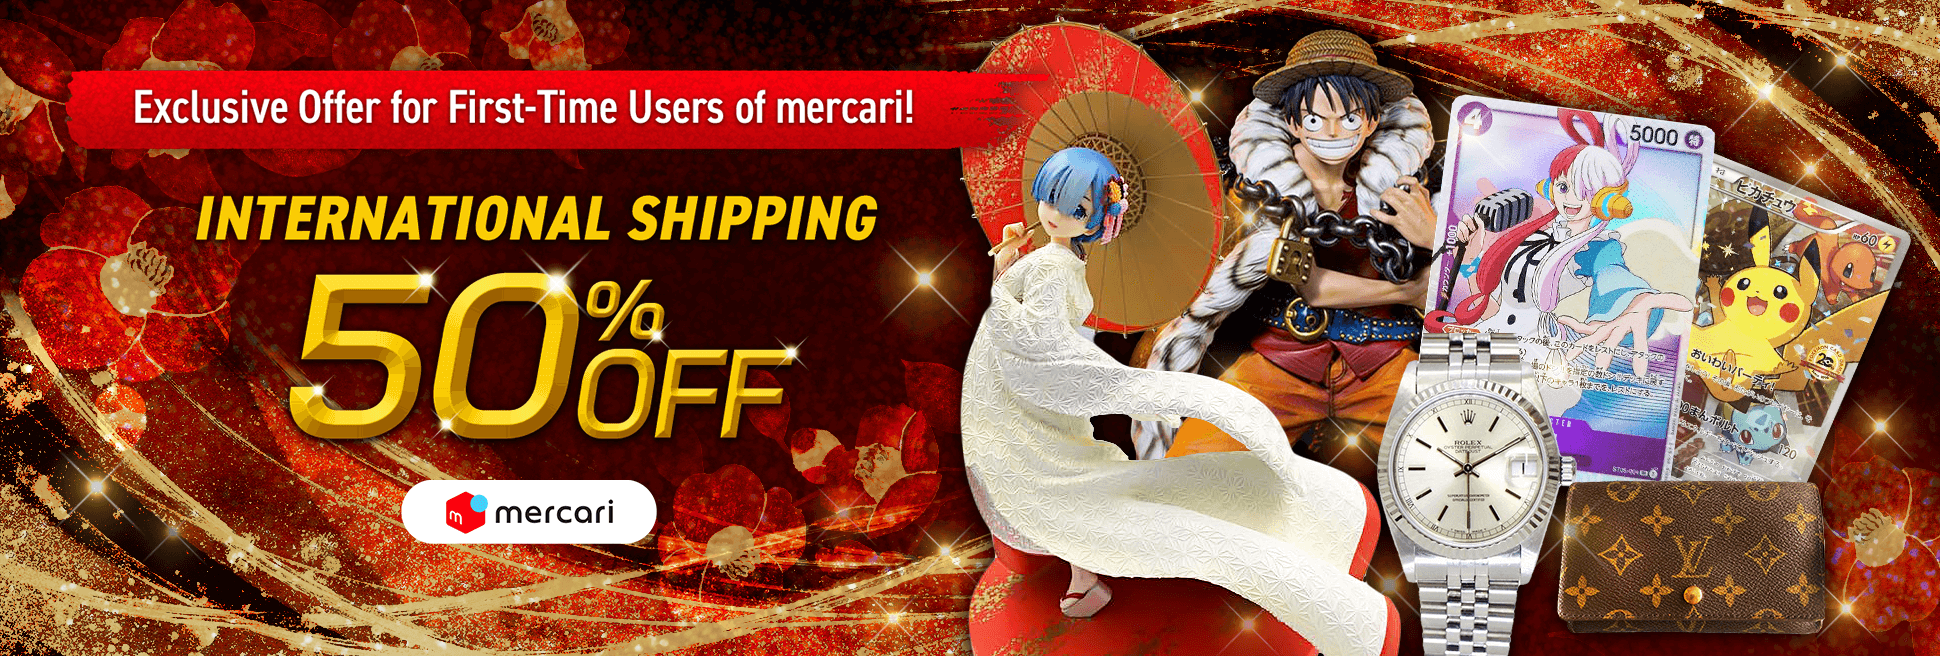 Exclusive Offer for First-Time Users of mercari!  International Shipping 50% OFF Coupon is now being distributed!